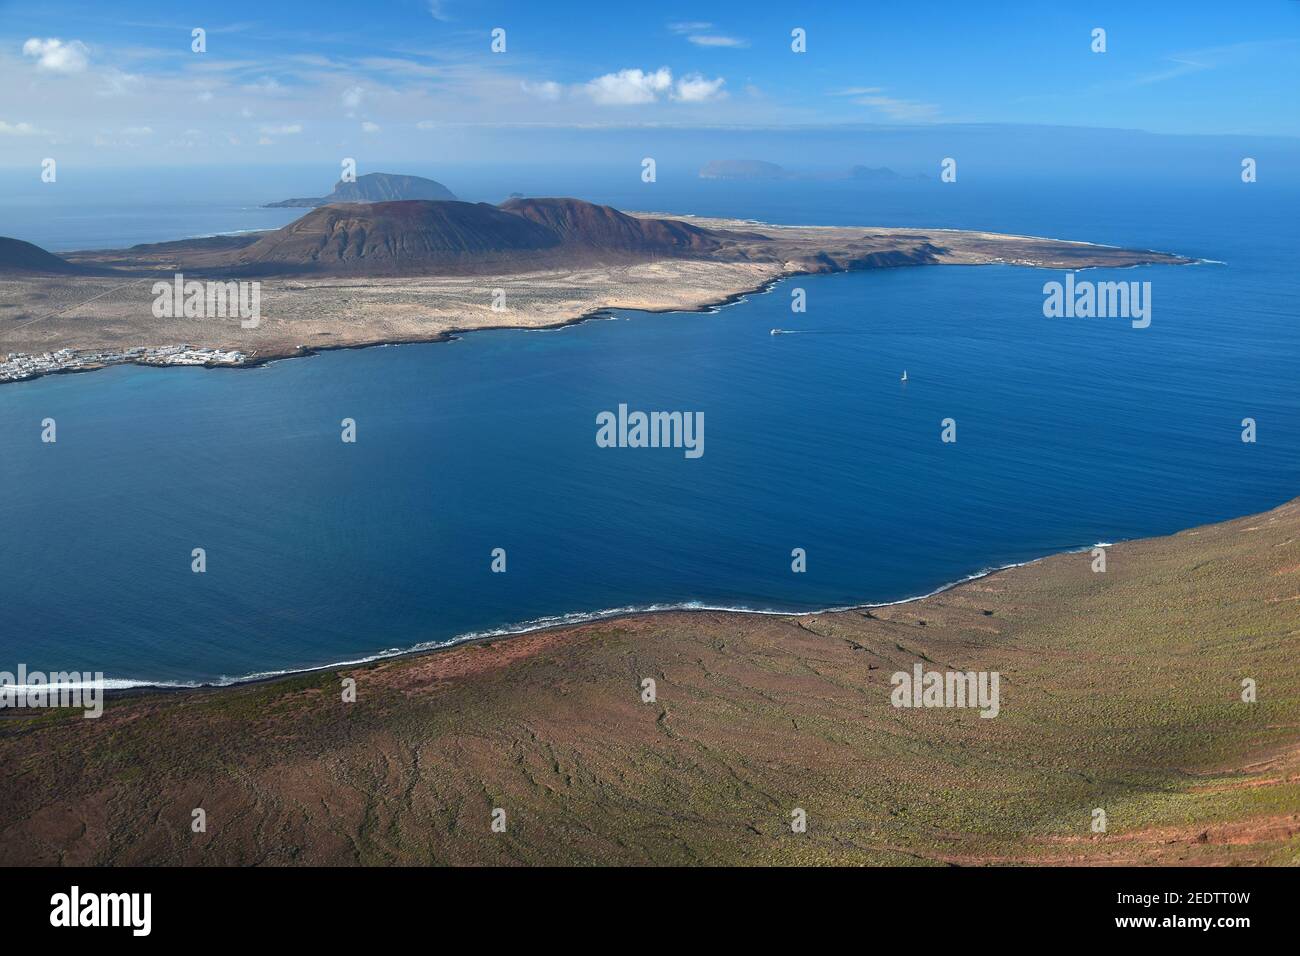 La Graciosa, a small volcanic island in the north of Lanzarote, Spain. Blue ocean and a blue sky with some white clouds. Far in the background the Isl Stock Photo